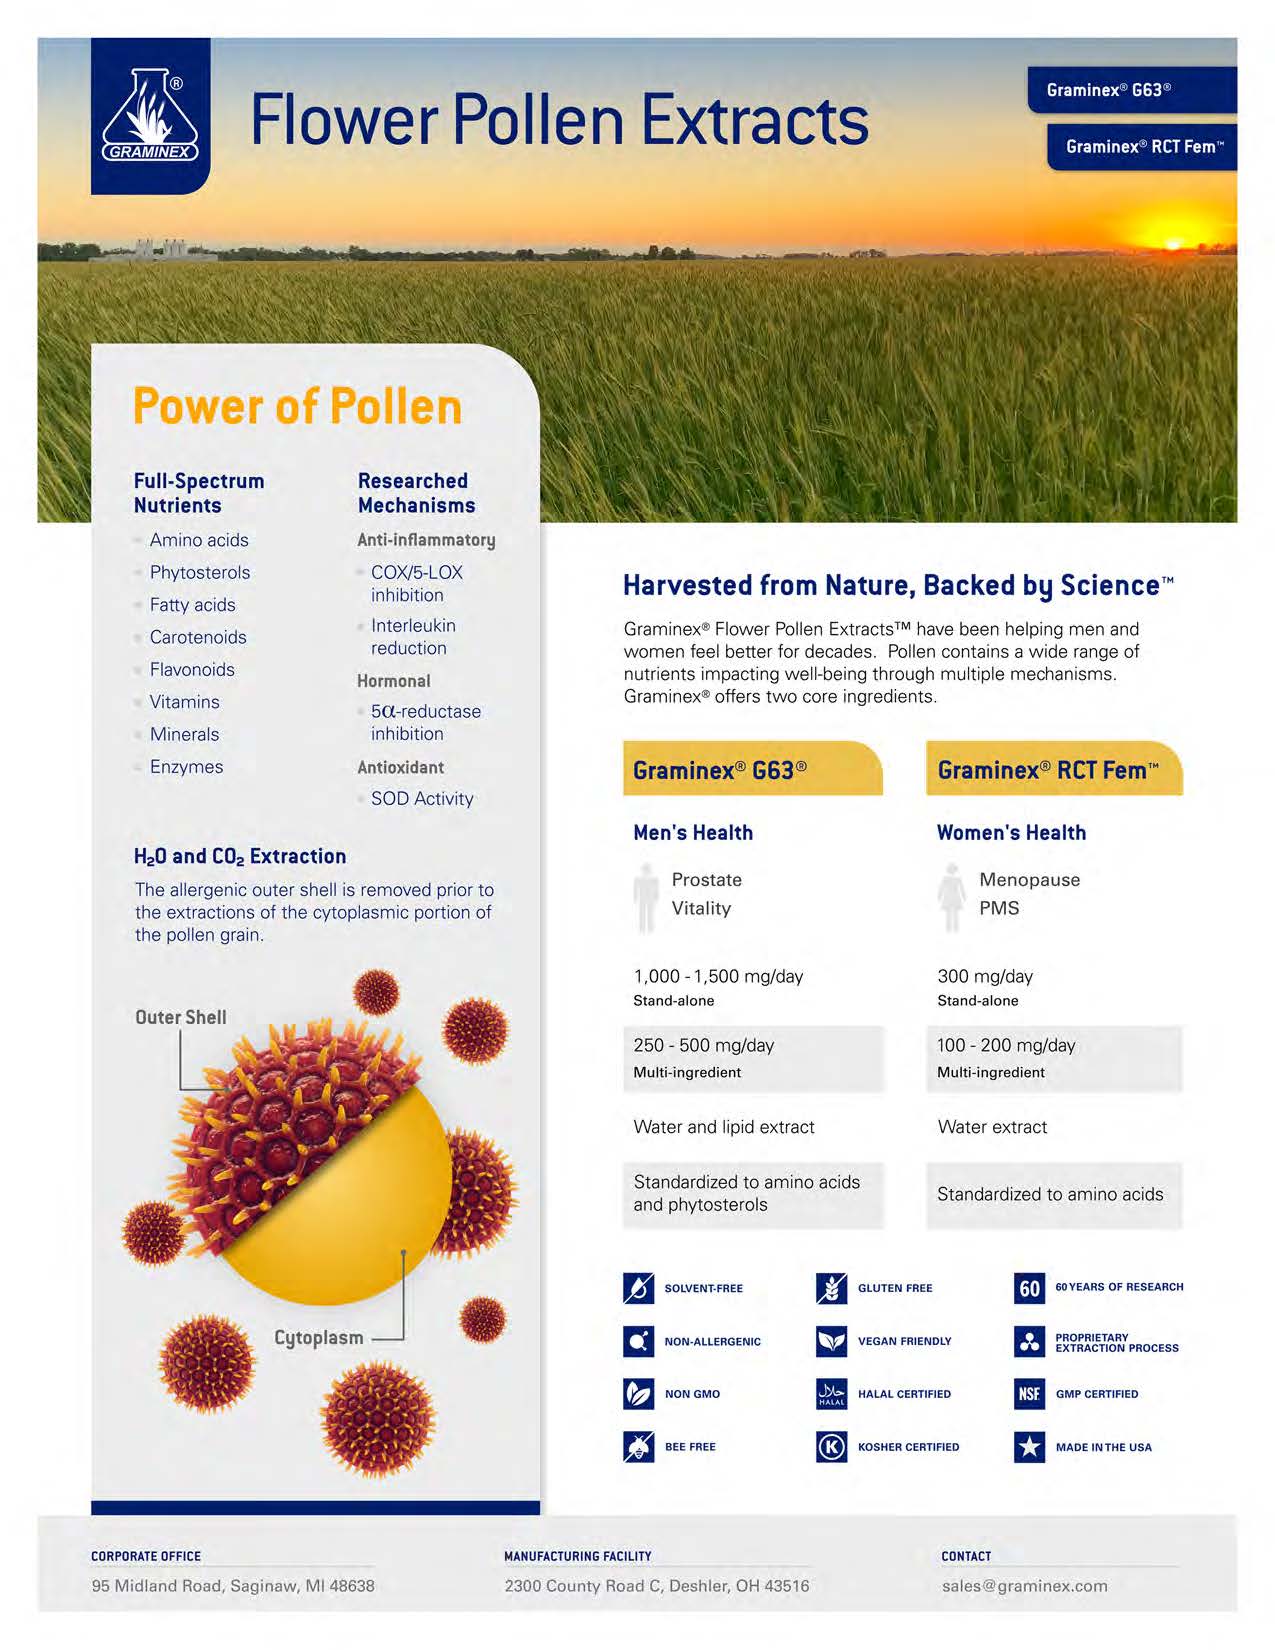 Graminex and Pollen Extract Overview